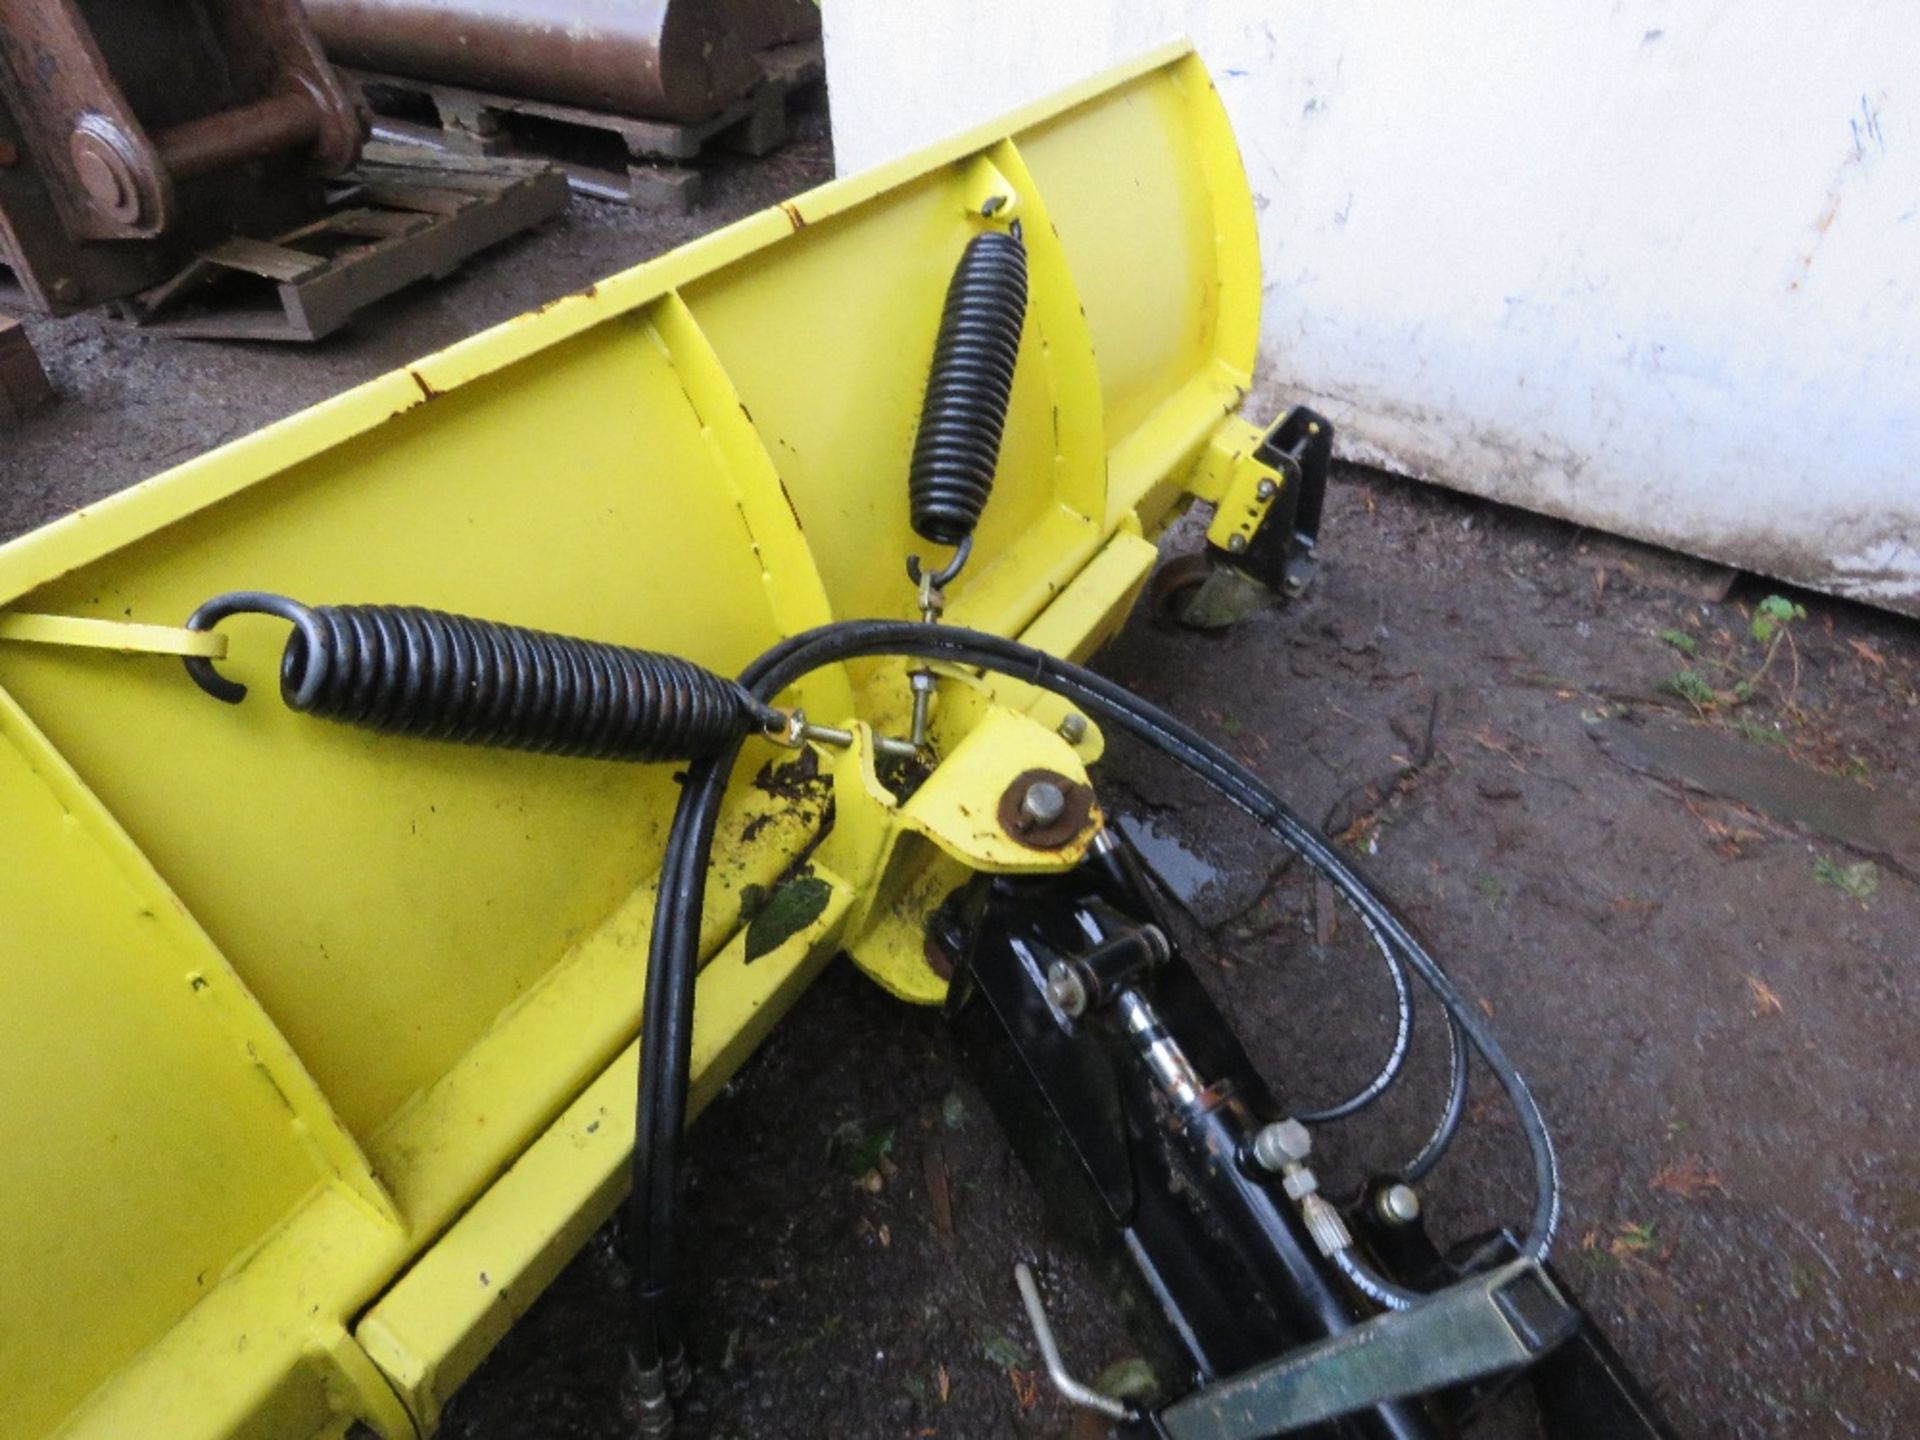 HME JOHN DEERE TYPE SNOW PLOUGH BLADE, HYDRAULIC ADJUSTMENT, 6FT WIDE APPROX. COULD MADE TO BE FITTE - Image 3 of 4